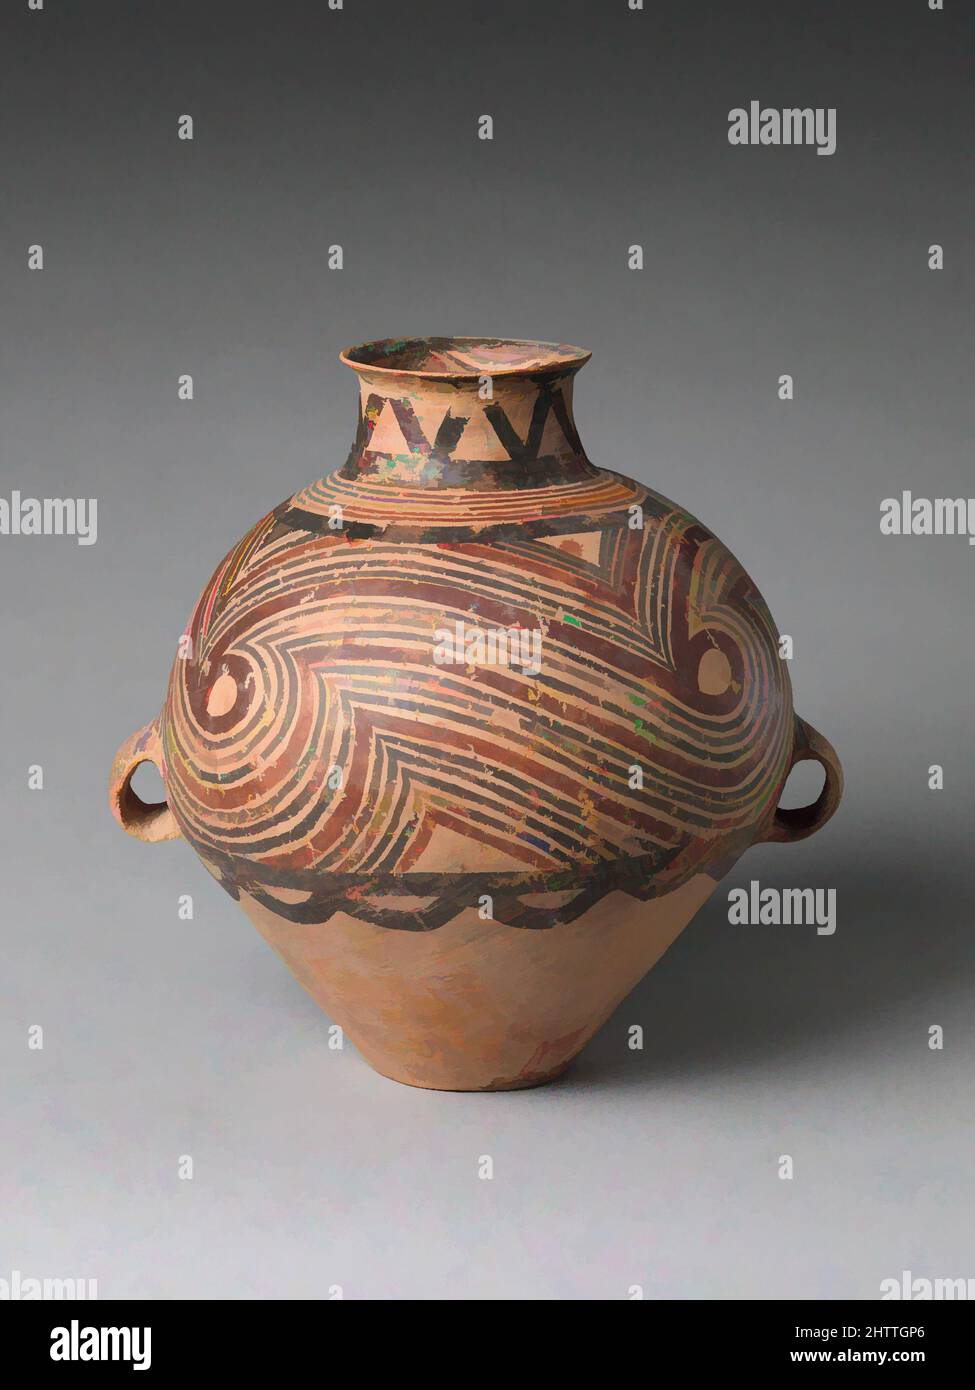 Art inspired by Jar (Hu), Neolithic, Majiayao culture, Banshan phase, ca. 2650–2350 B.C., China, Earthenware with painted decoration, H. 13 3/8 in. (34 cm), Ceramics, Classic works modernized by Artotop with a splash of modernity. Shapes, color and value, eye-catching visual impact on art. Emotions through freedom of artworks in a contemporary way. A timeless message pursuing a wildly creative new direction. Artists turning to the digital medium and creating the Artotop NFT Stock Photo